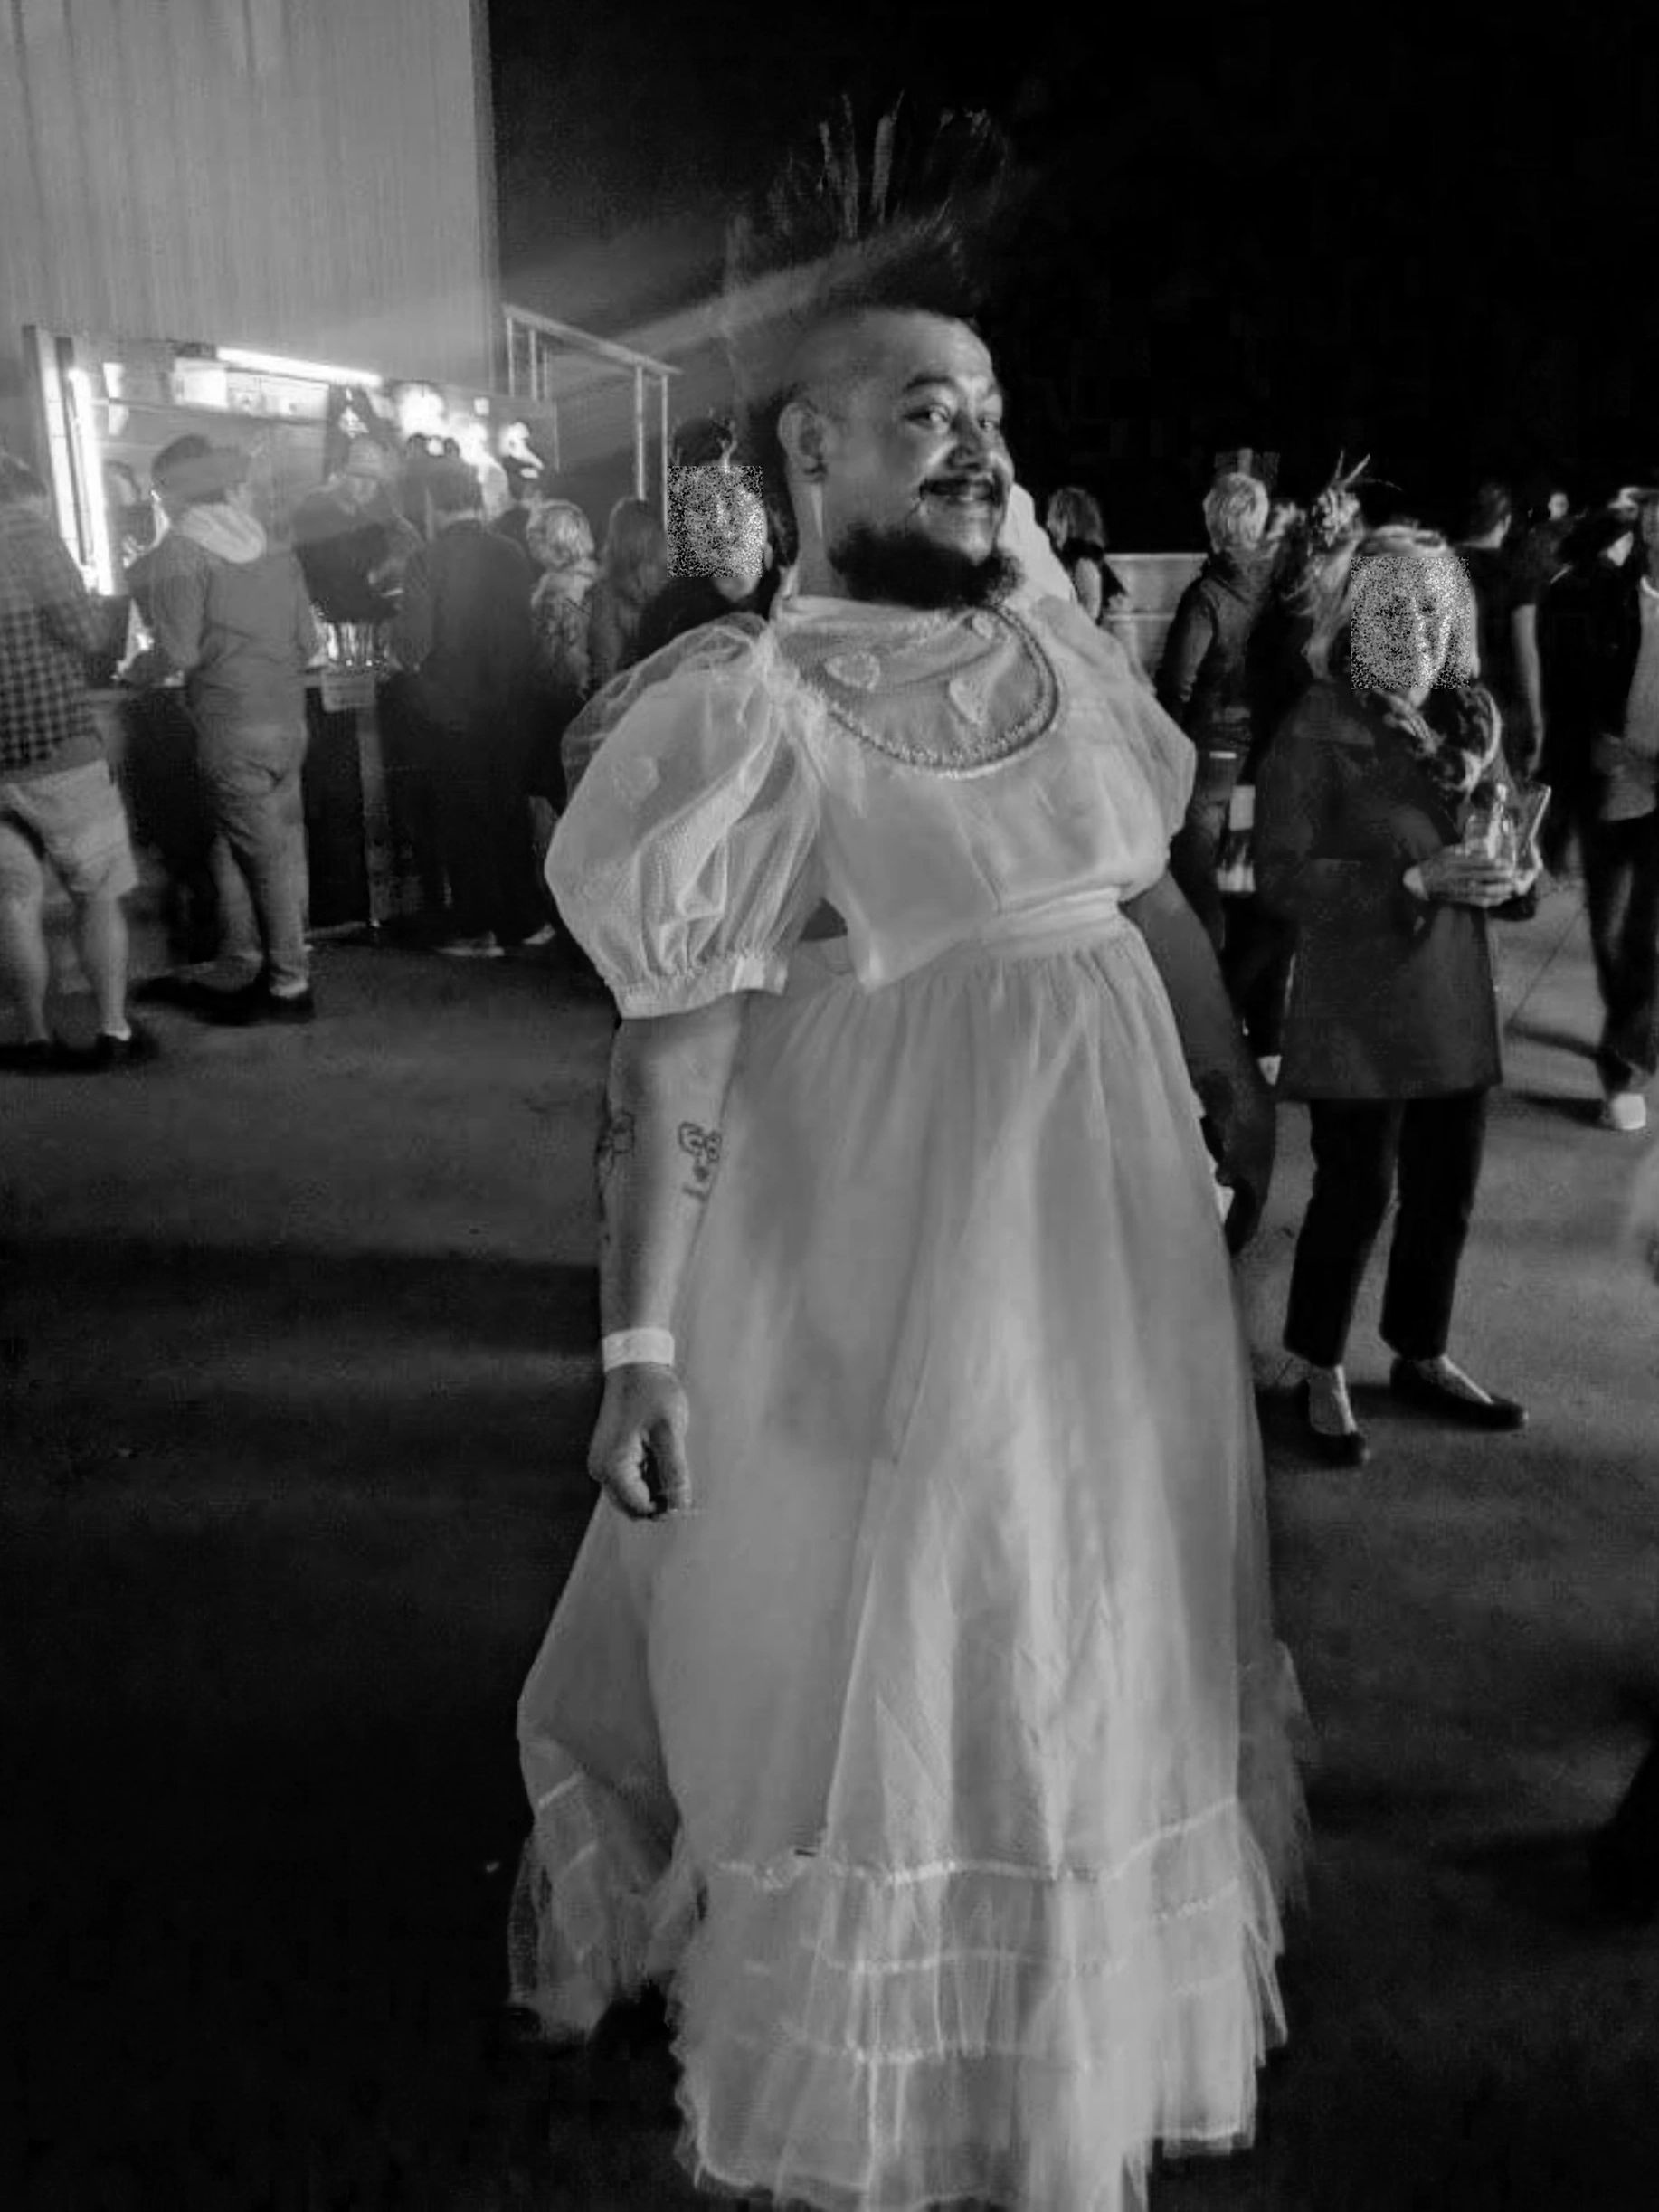 Surreal Sea 2017 - Austin TX 
ION ART Event.  Me in a wedding dress and a mohawk.